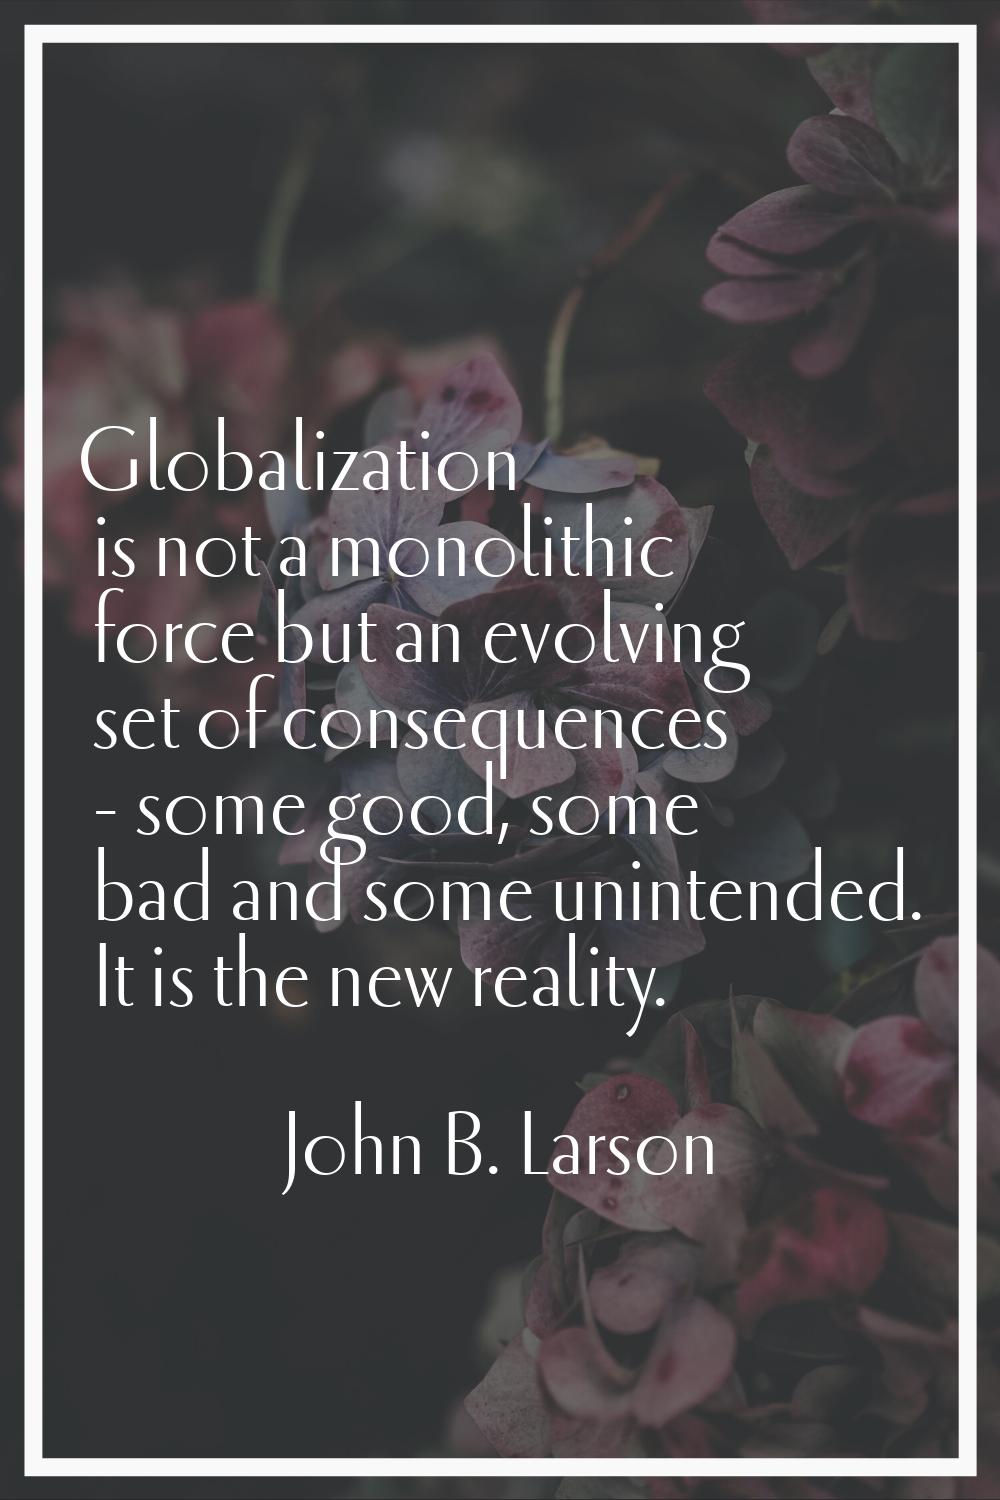 Globalization is not a monolithic force but an evolving set of consequences - some good, some bad a